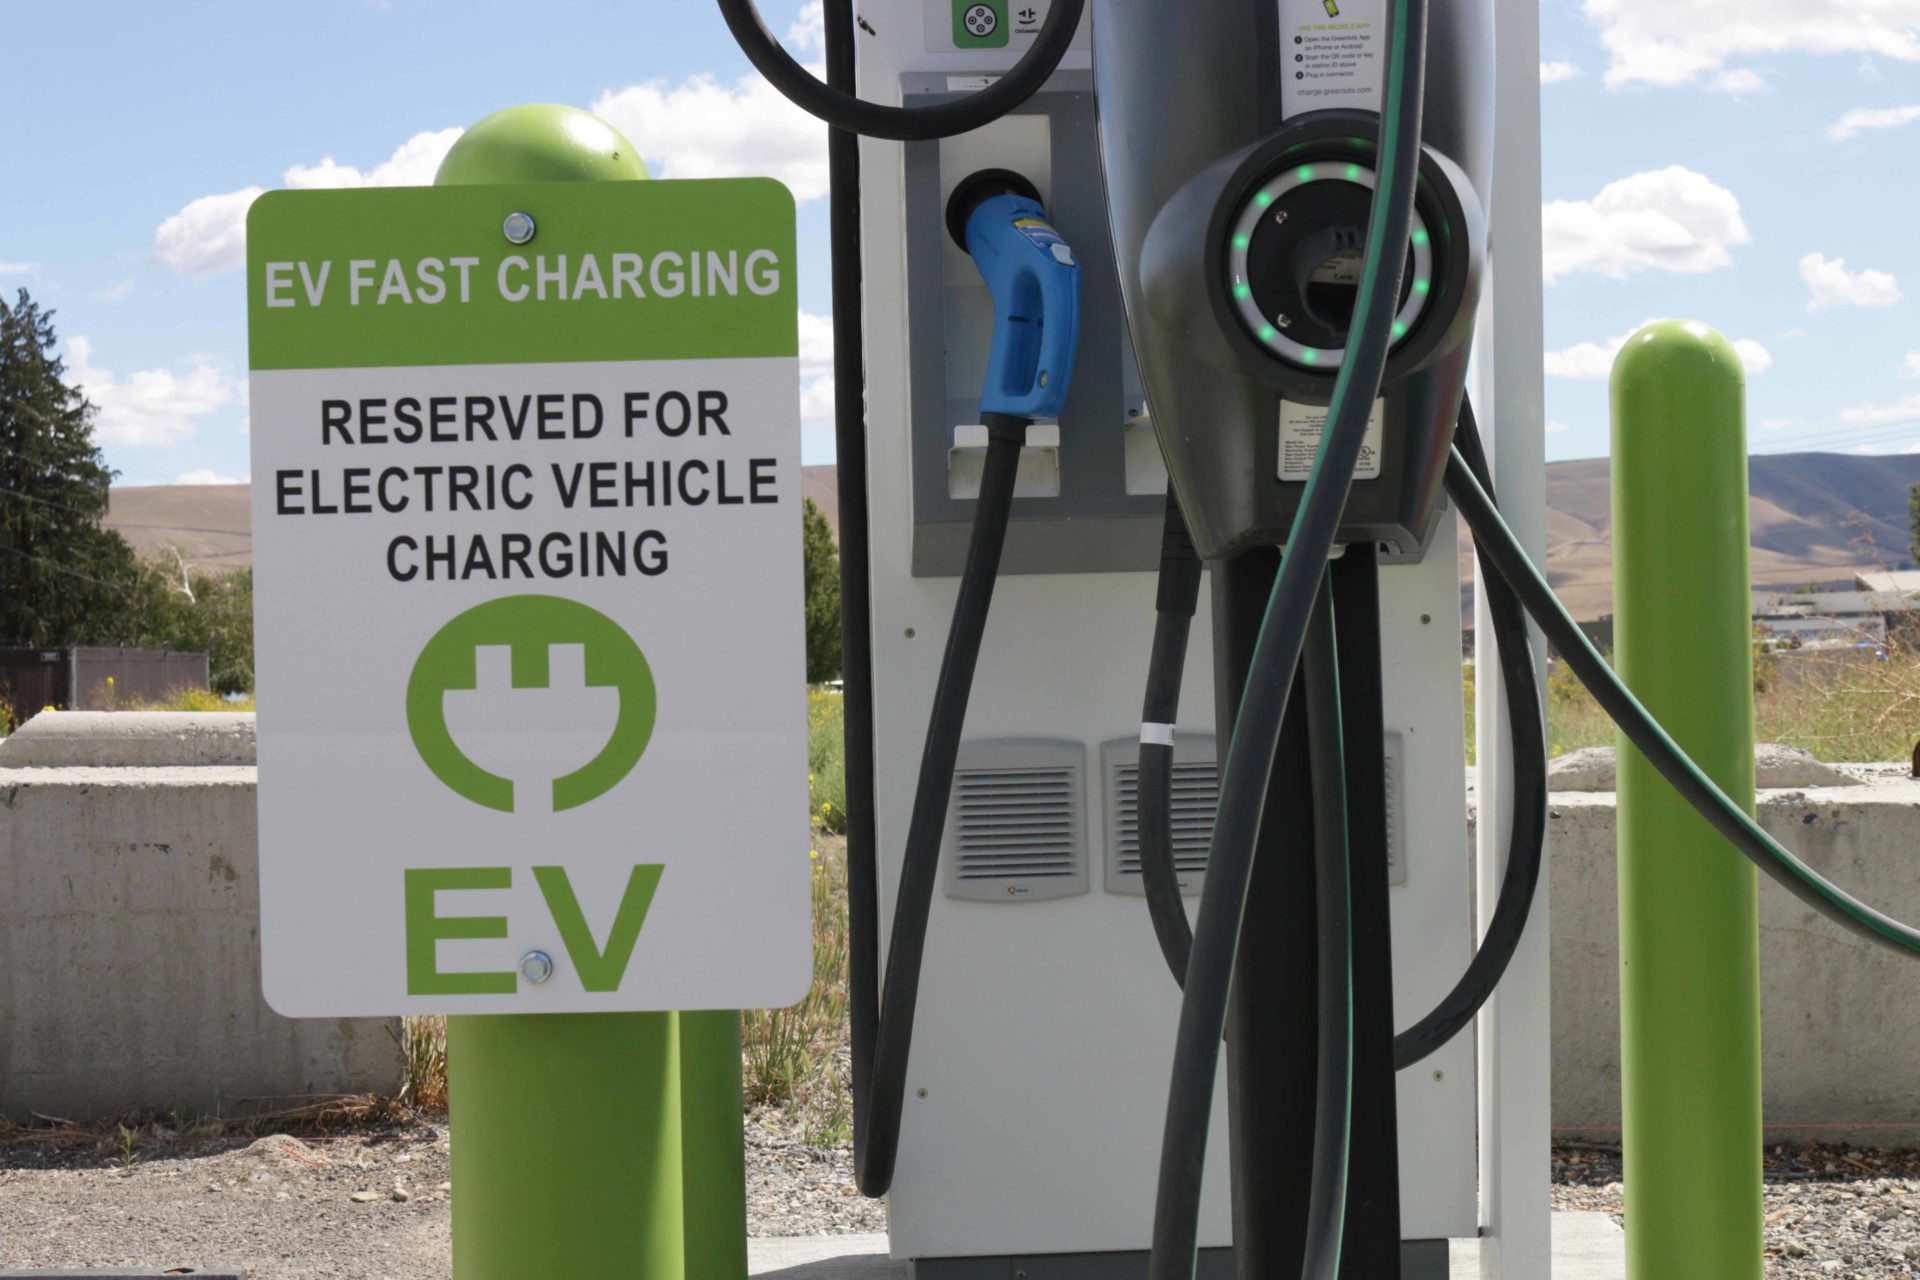 Electric Vehicle Fast Charting station with sign that says "Reserved for Electric Vehicle Charging"